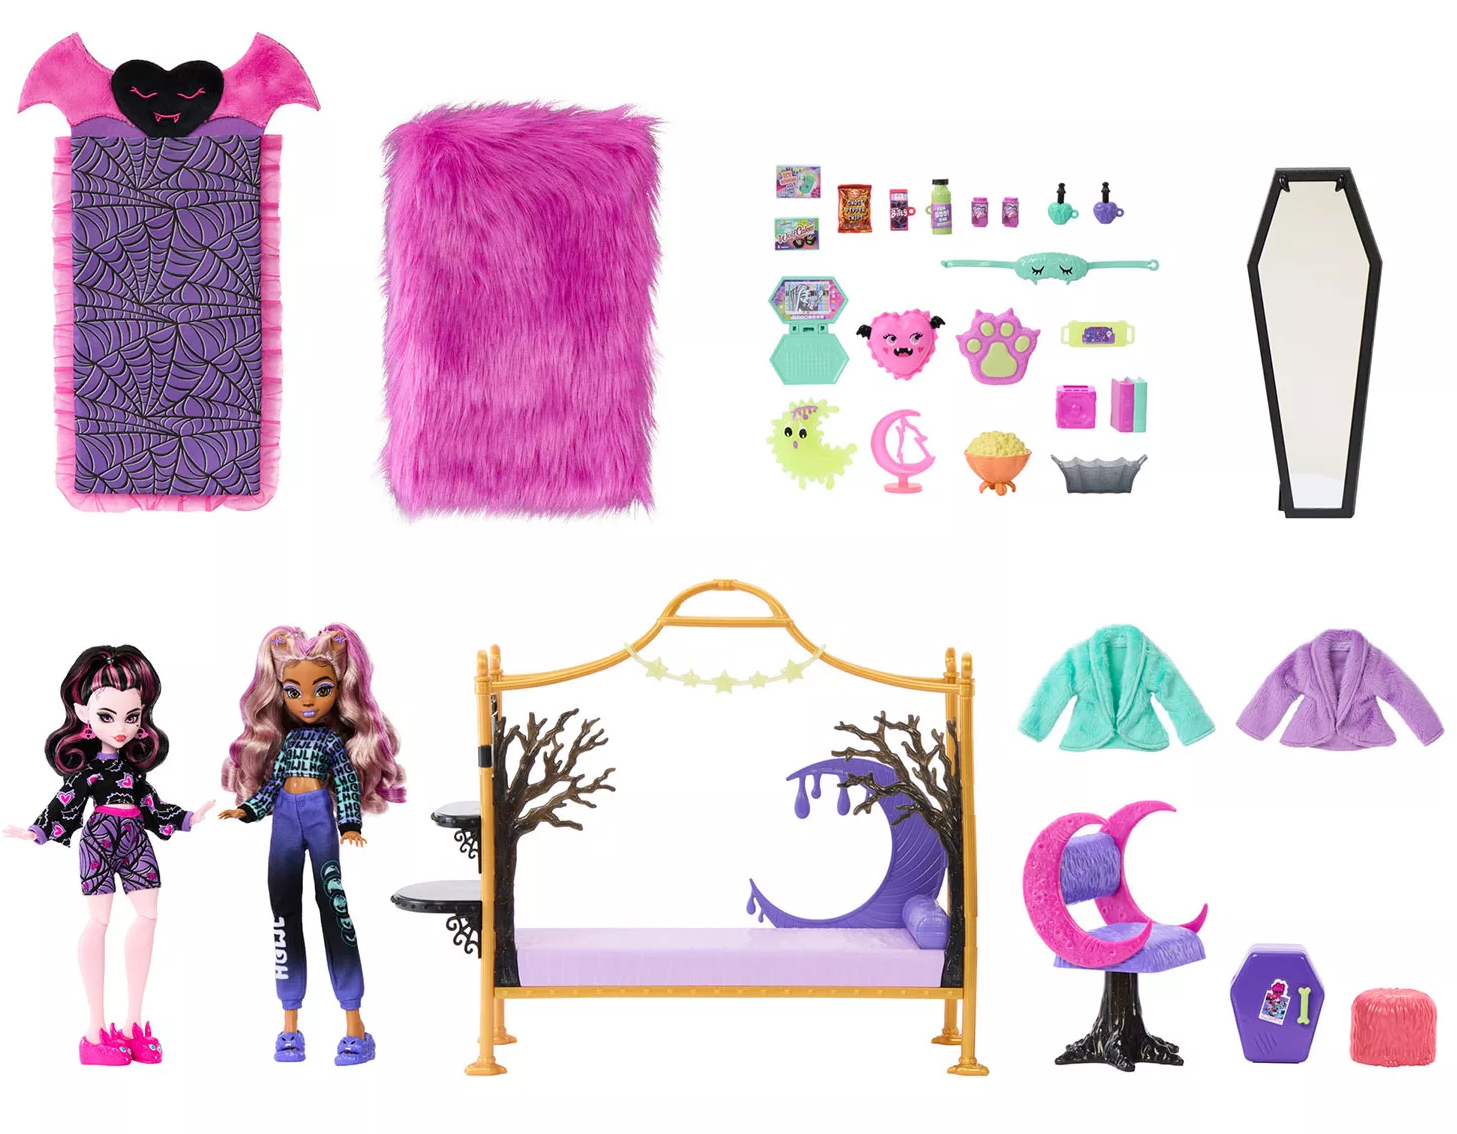 Monster High Doll and Fashion Playset, Clawdeen Wolf Doll and Accessories,  Boutique Dress-Up Studio with 20+ Pieces